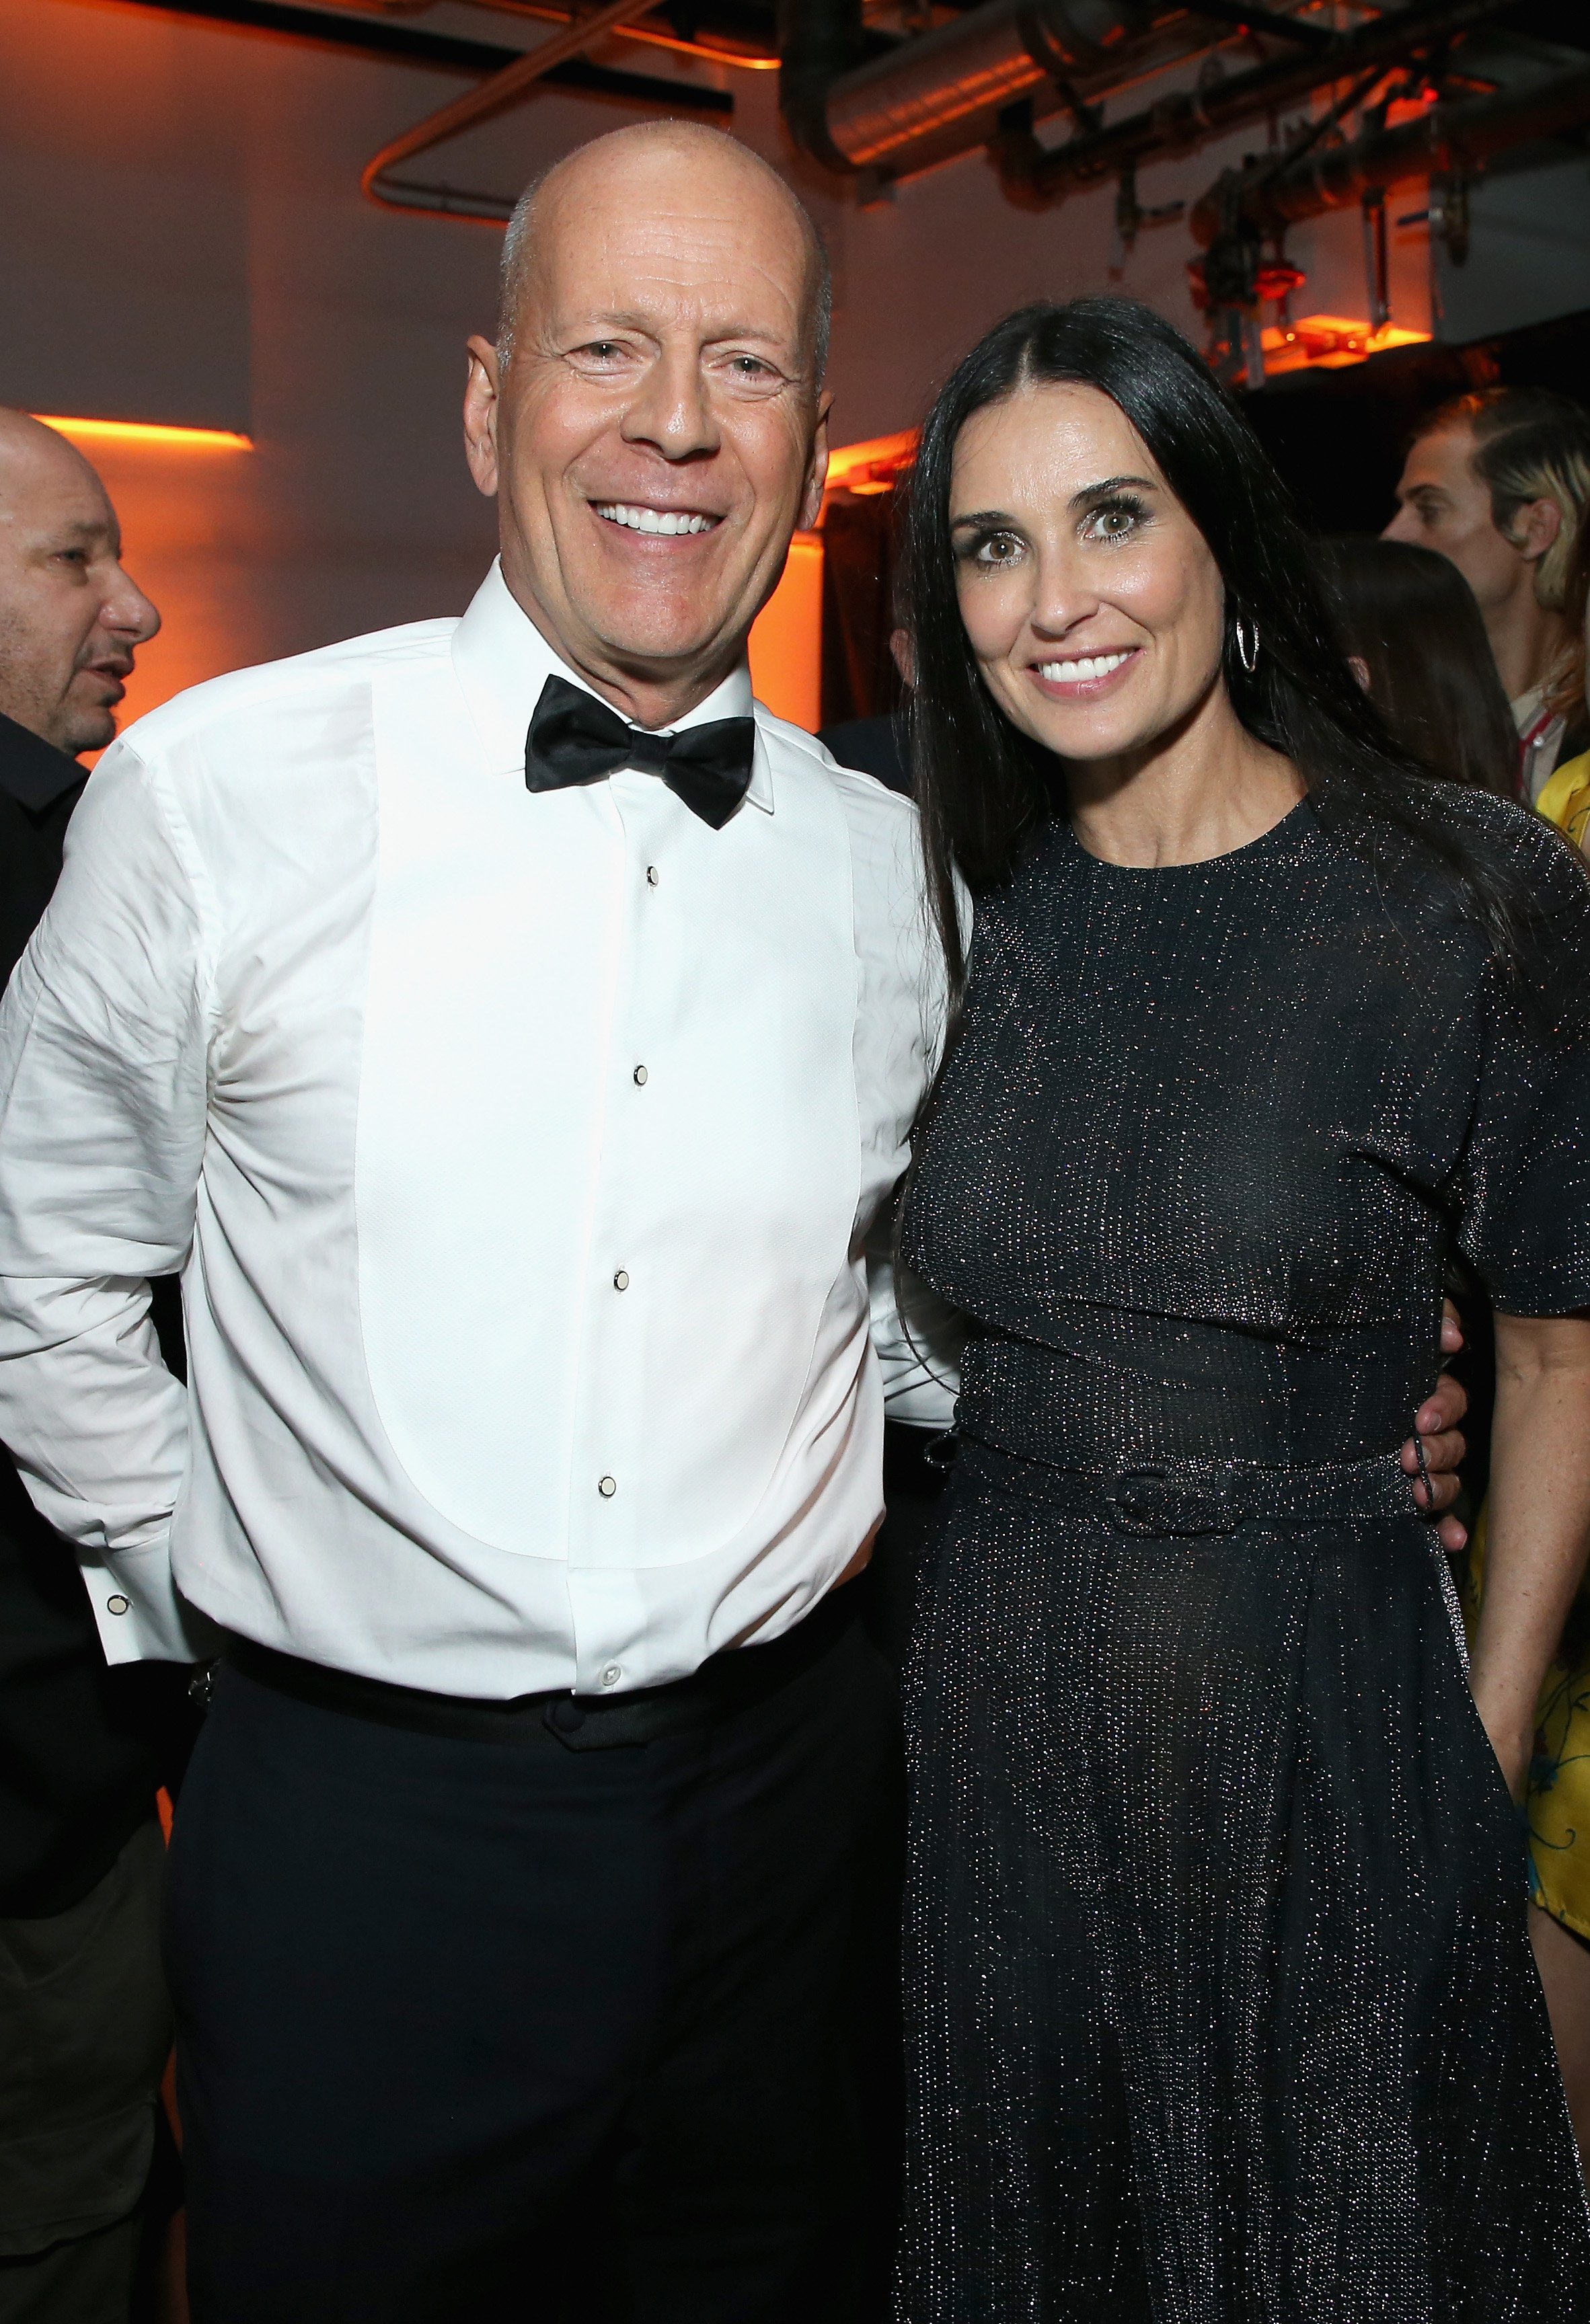 Bruce Willis and Demi Moore attend the after party for the Comedy Central Roast of Bruce Willis at NeueHouse on July 14, 2018 in Los Angeles, California. | Photo: Getty Images